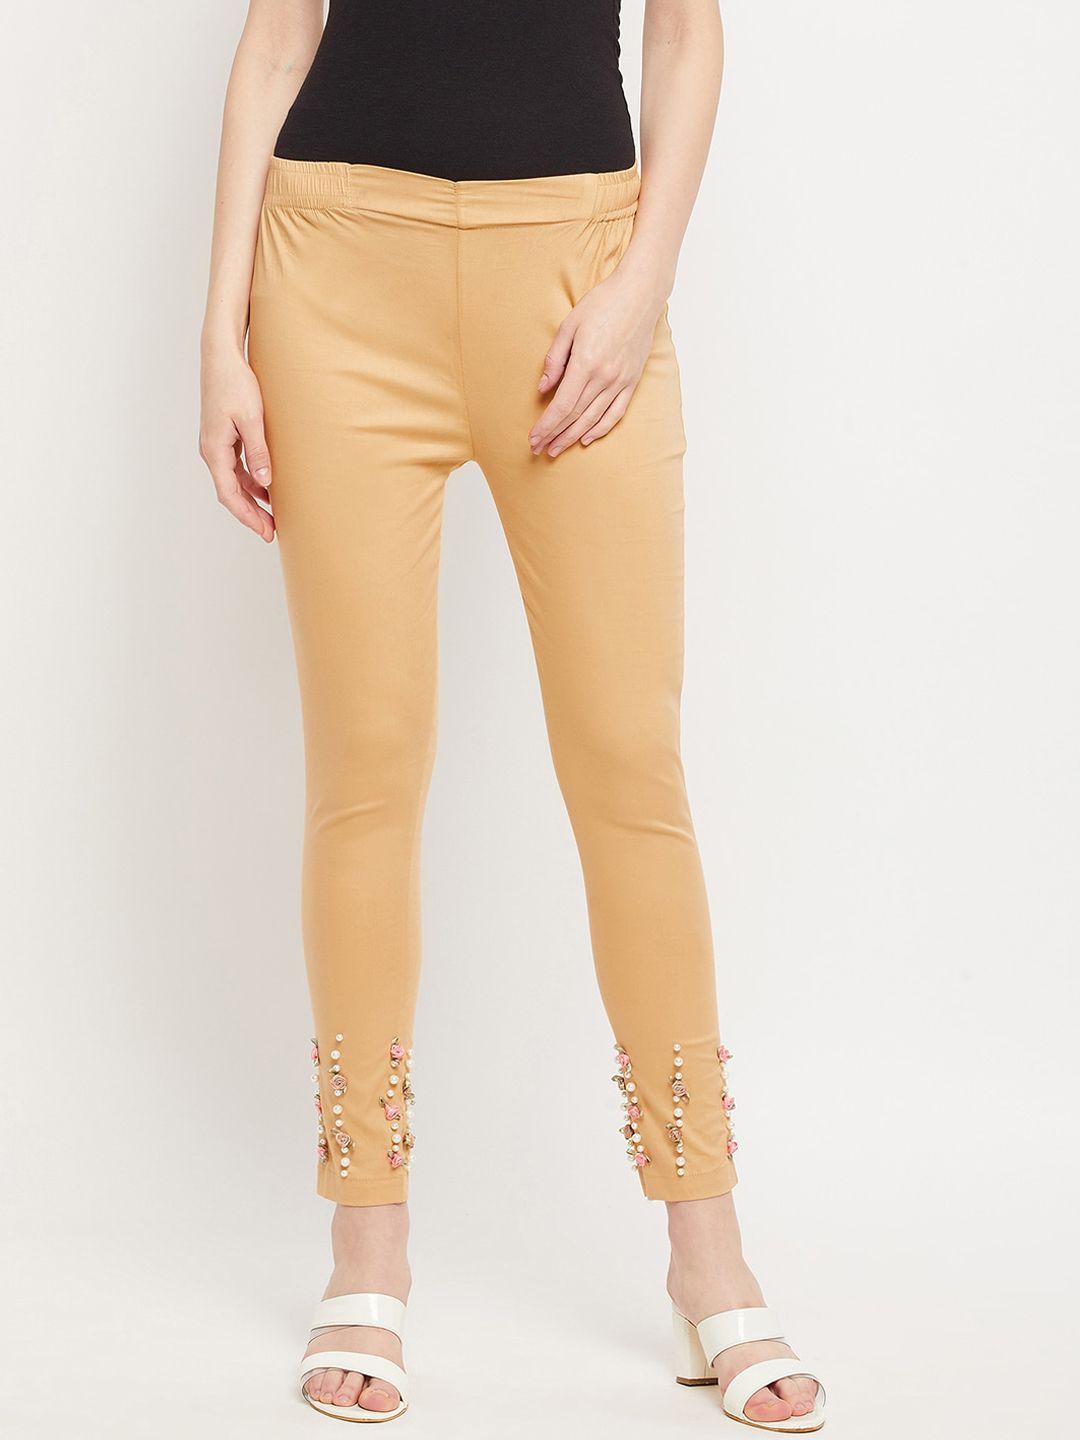 clora-creation-women-cotton-embellished-trousers